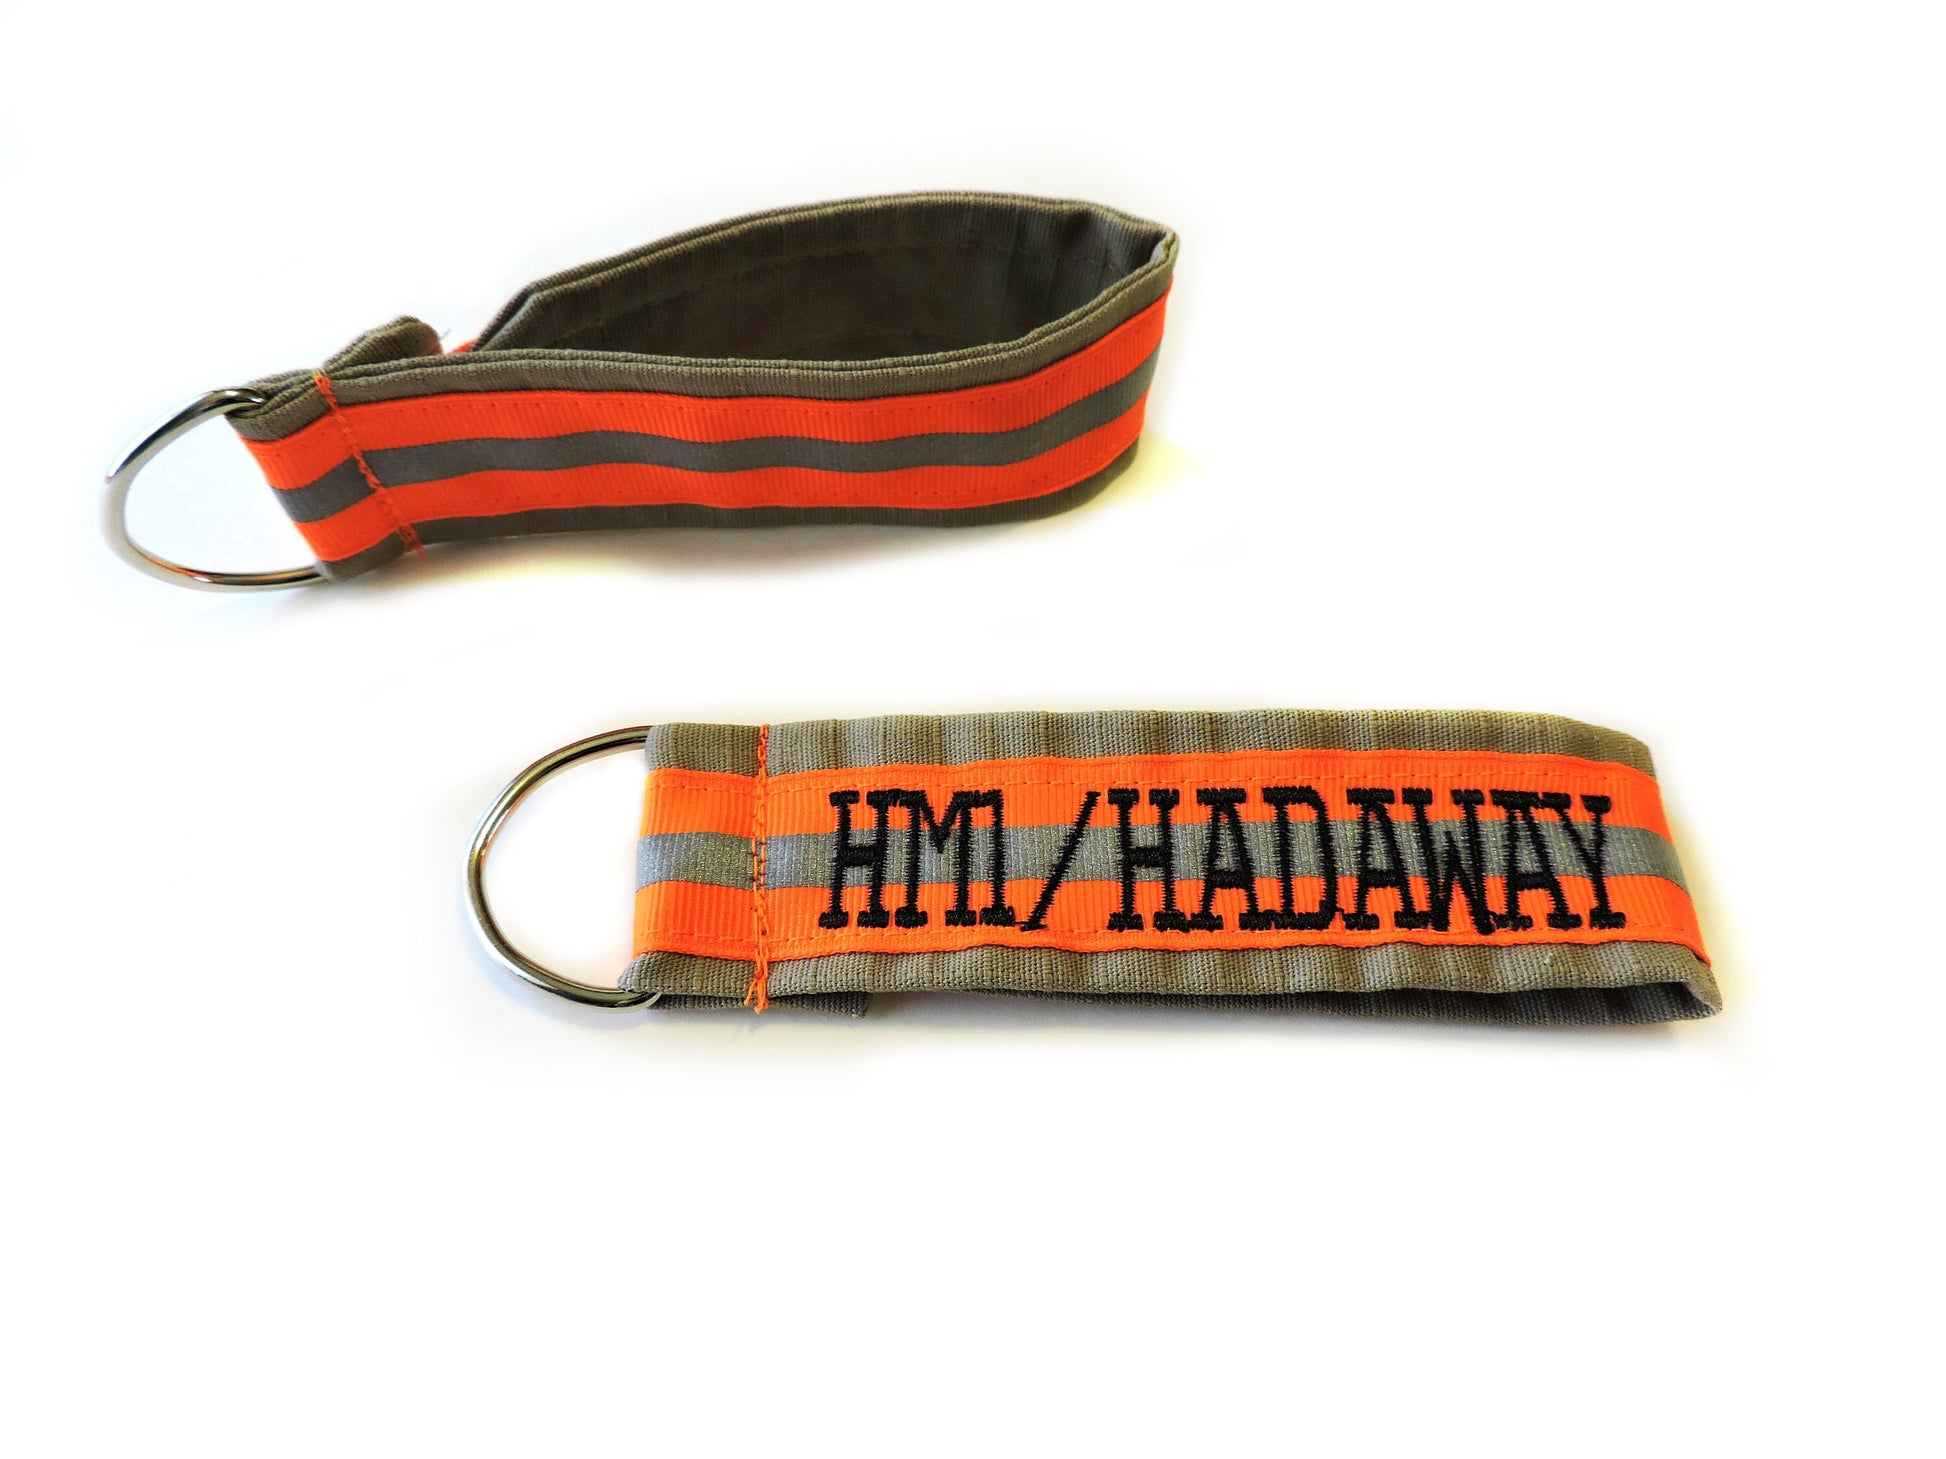 tan fabric with neon orange reflective tape firefighter keychain